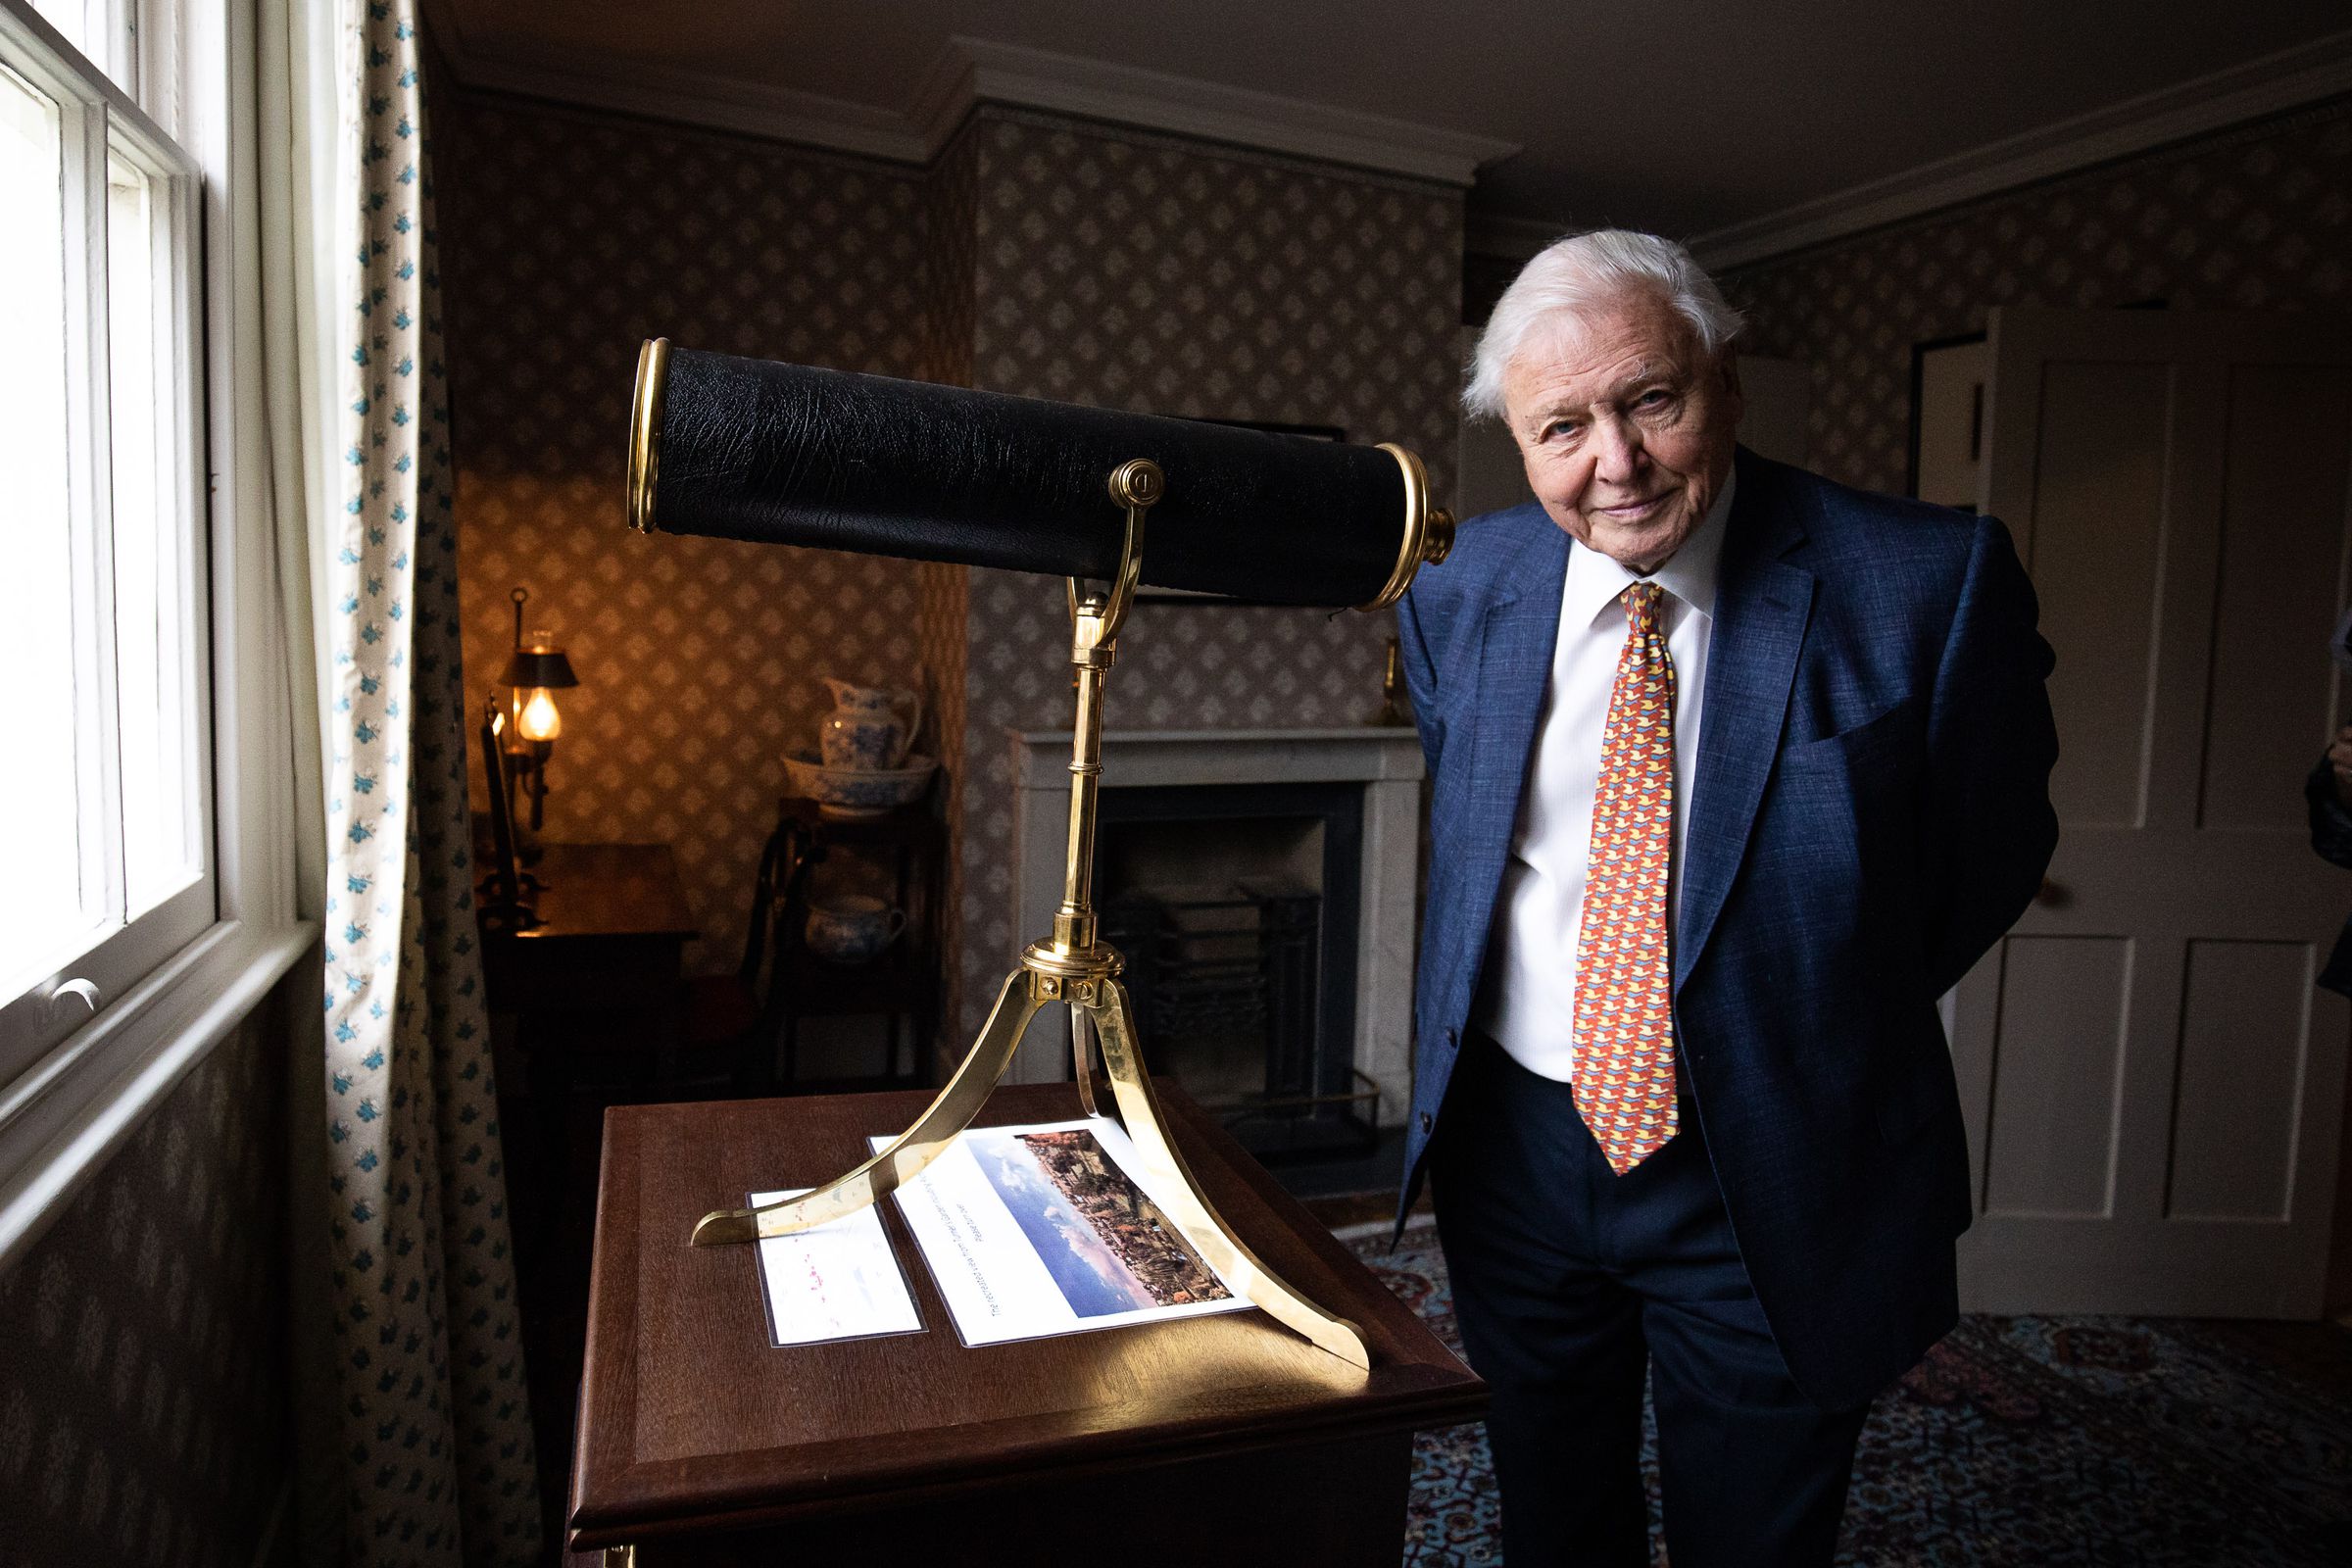 Sir David Attenborough opens an art exhibition on January 10, 2020, in London, England.